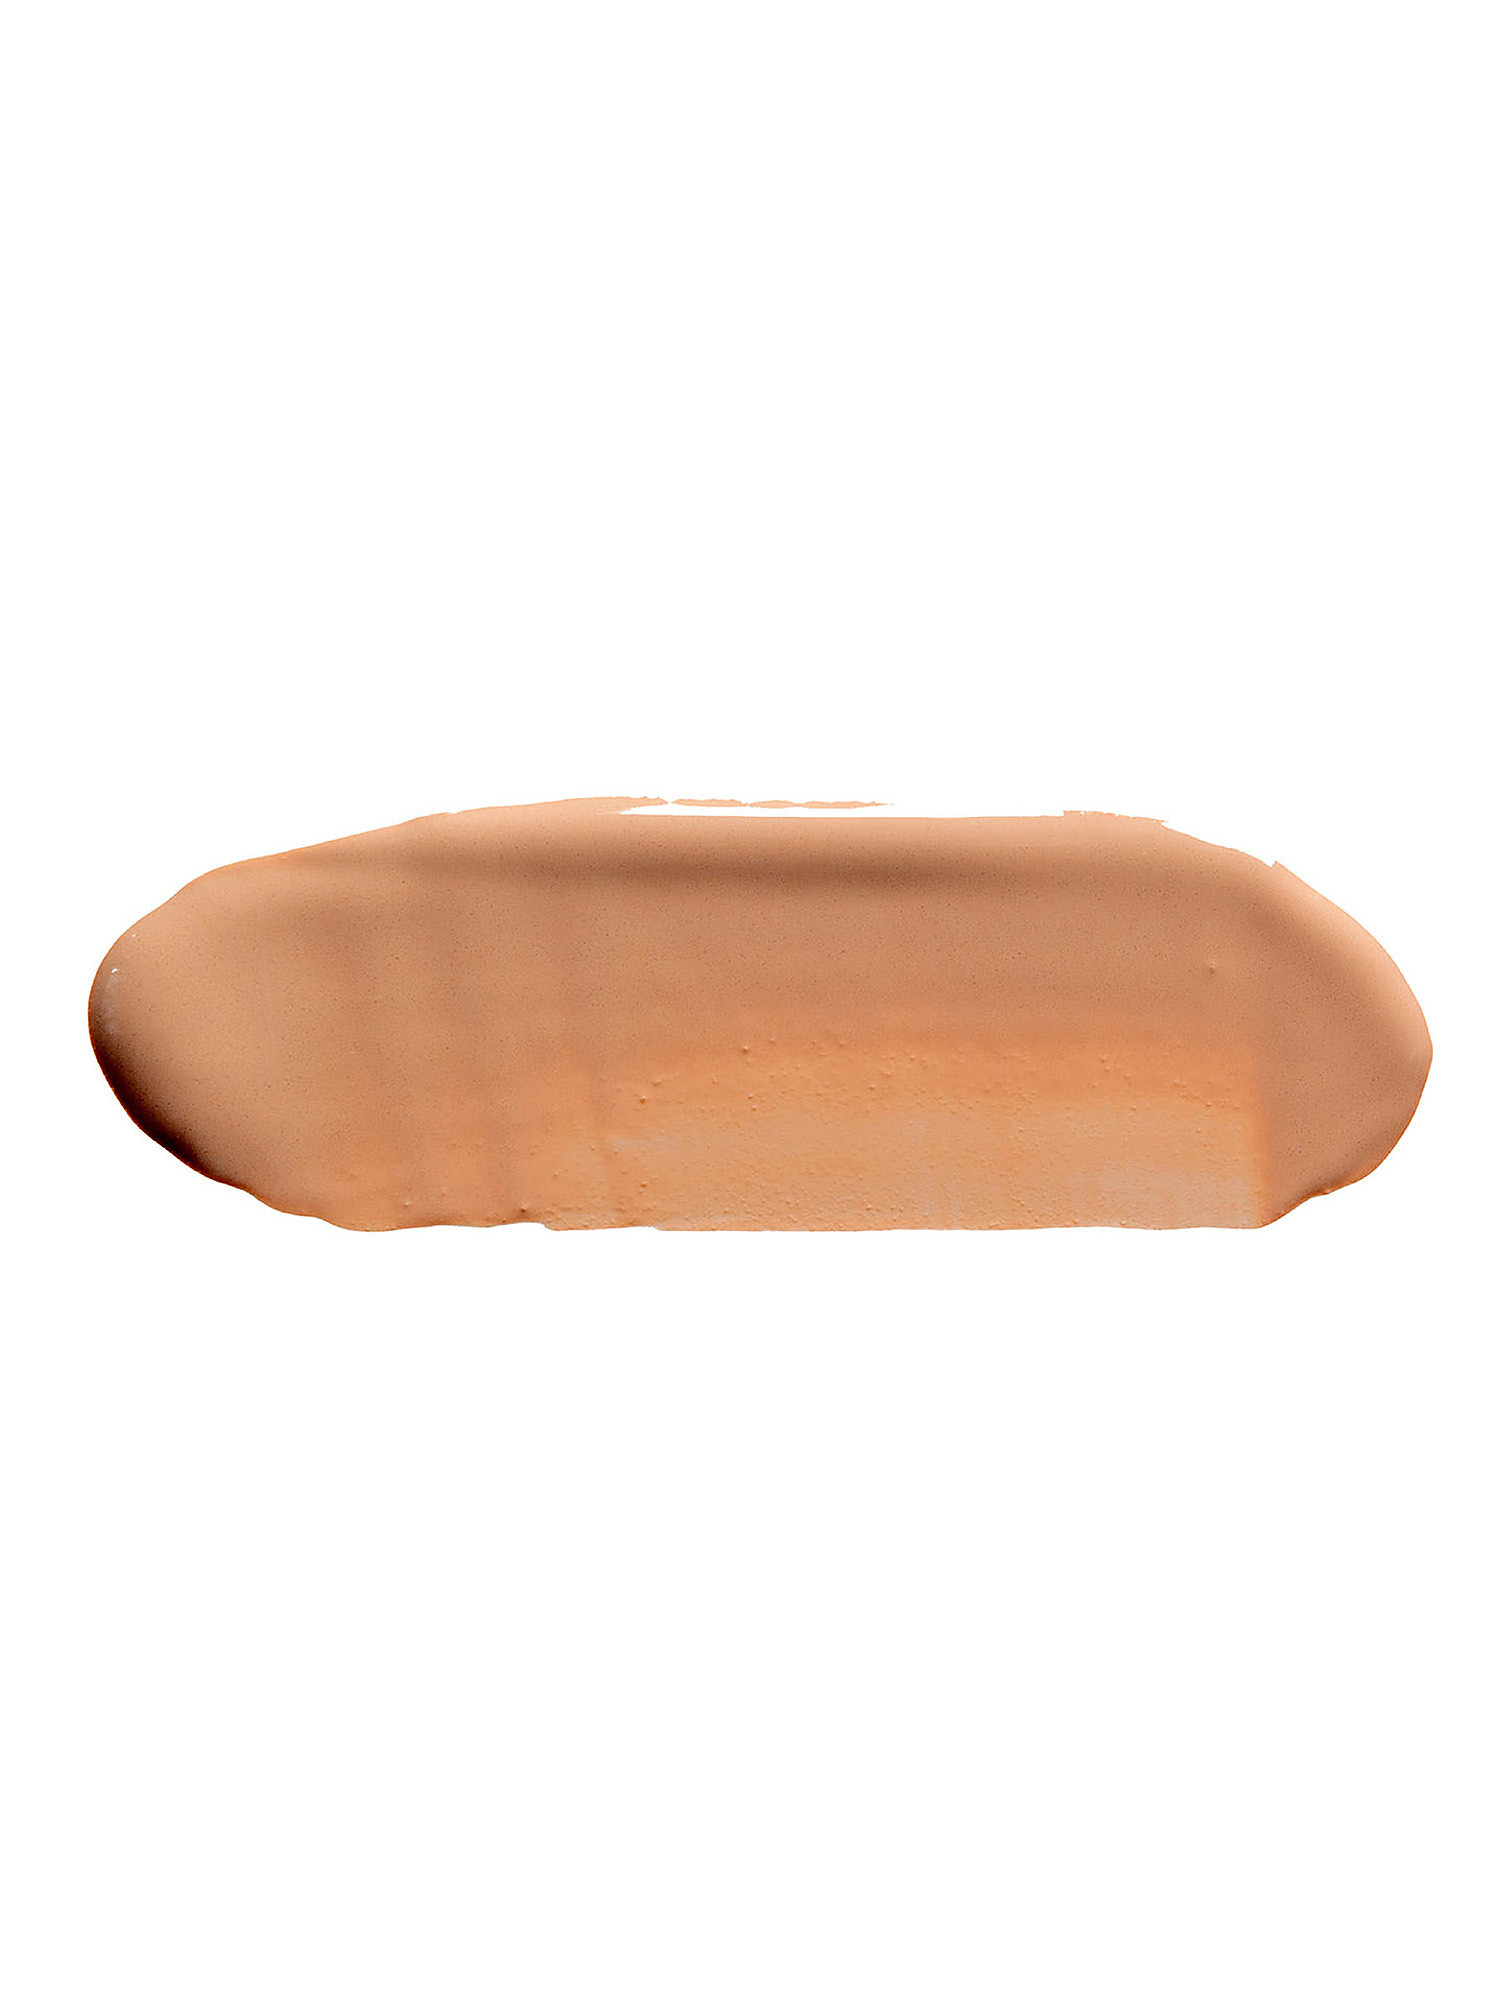 NUDISSIMO Naturally Matte Foundation - 248W, Copper Brown, large image number 1